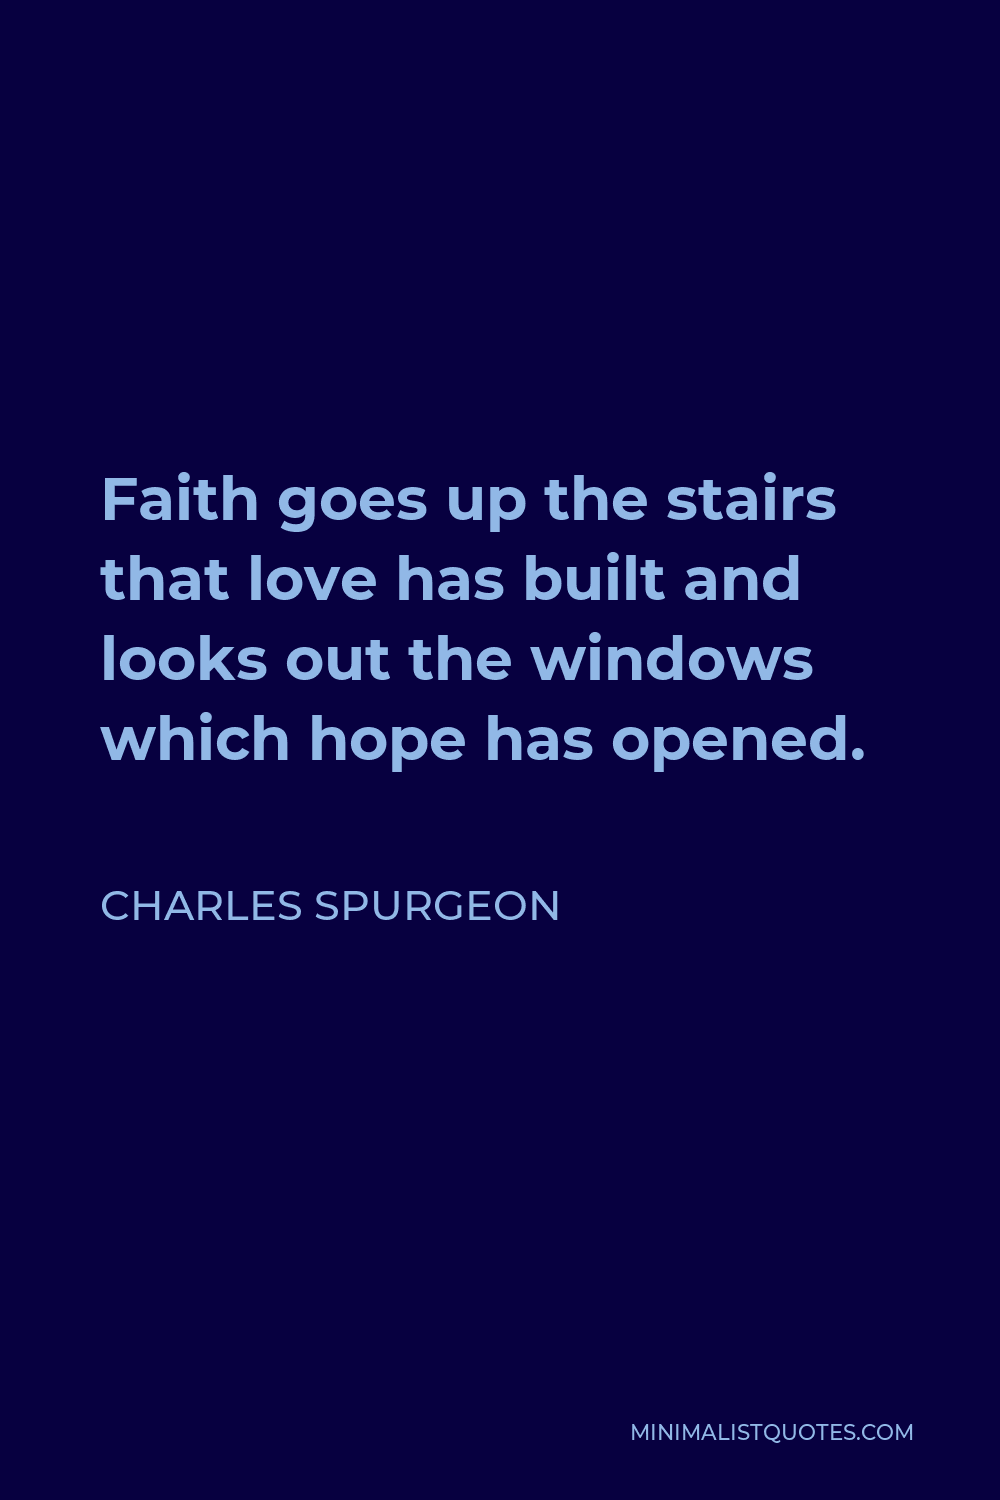 Charles Spurgeon Quote - Faith goes up the stairs that love has built and looks out the windows which hope has opened.